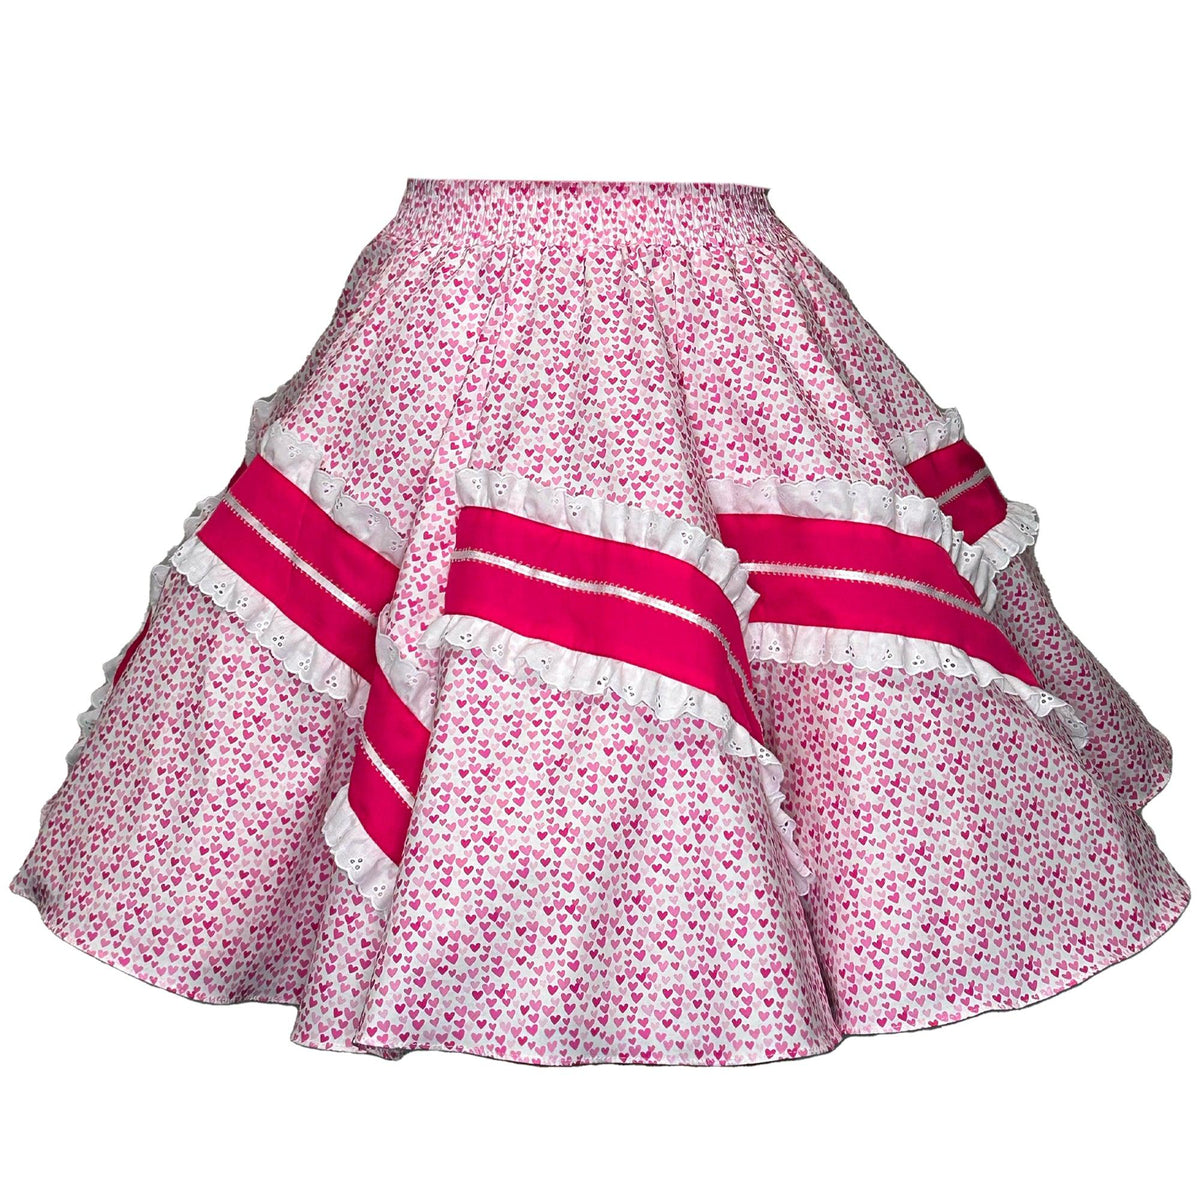 A white, heart print skirt with pink floral patterns, adorned with wide pink stripes and white ruffles from Square Up Fashions, called the Valentine&#39;s XL Square Dance Skirt.